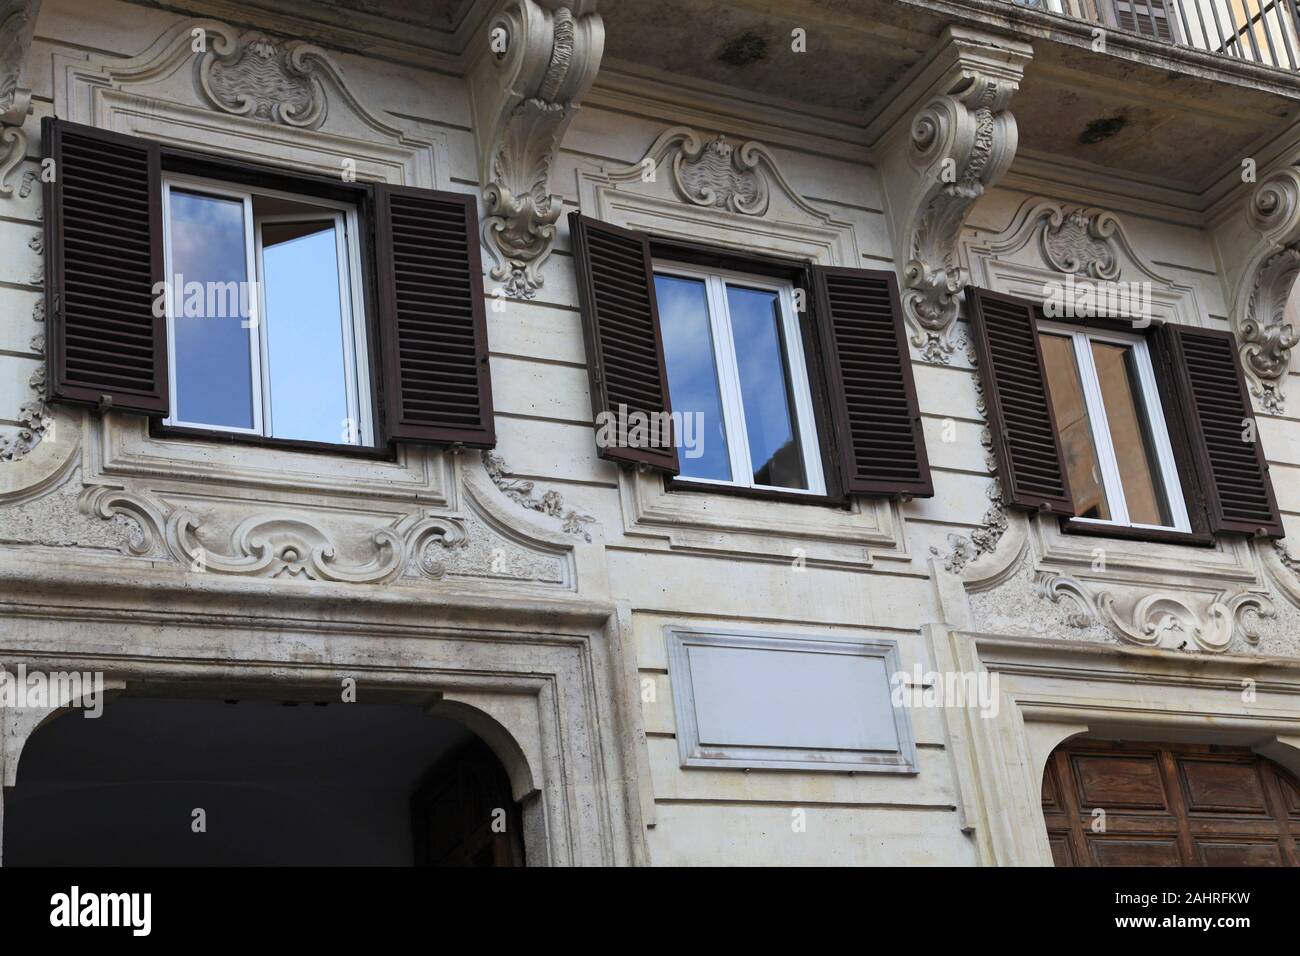 facade of ornate baroque style apartment building typical of Rome Stock Photo